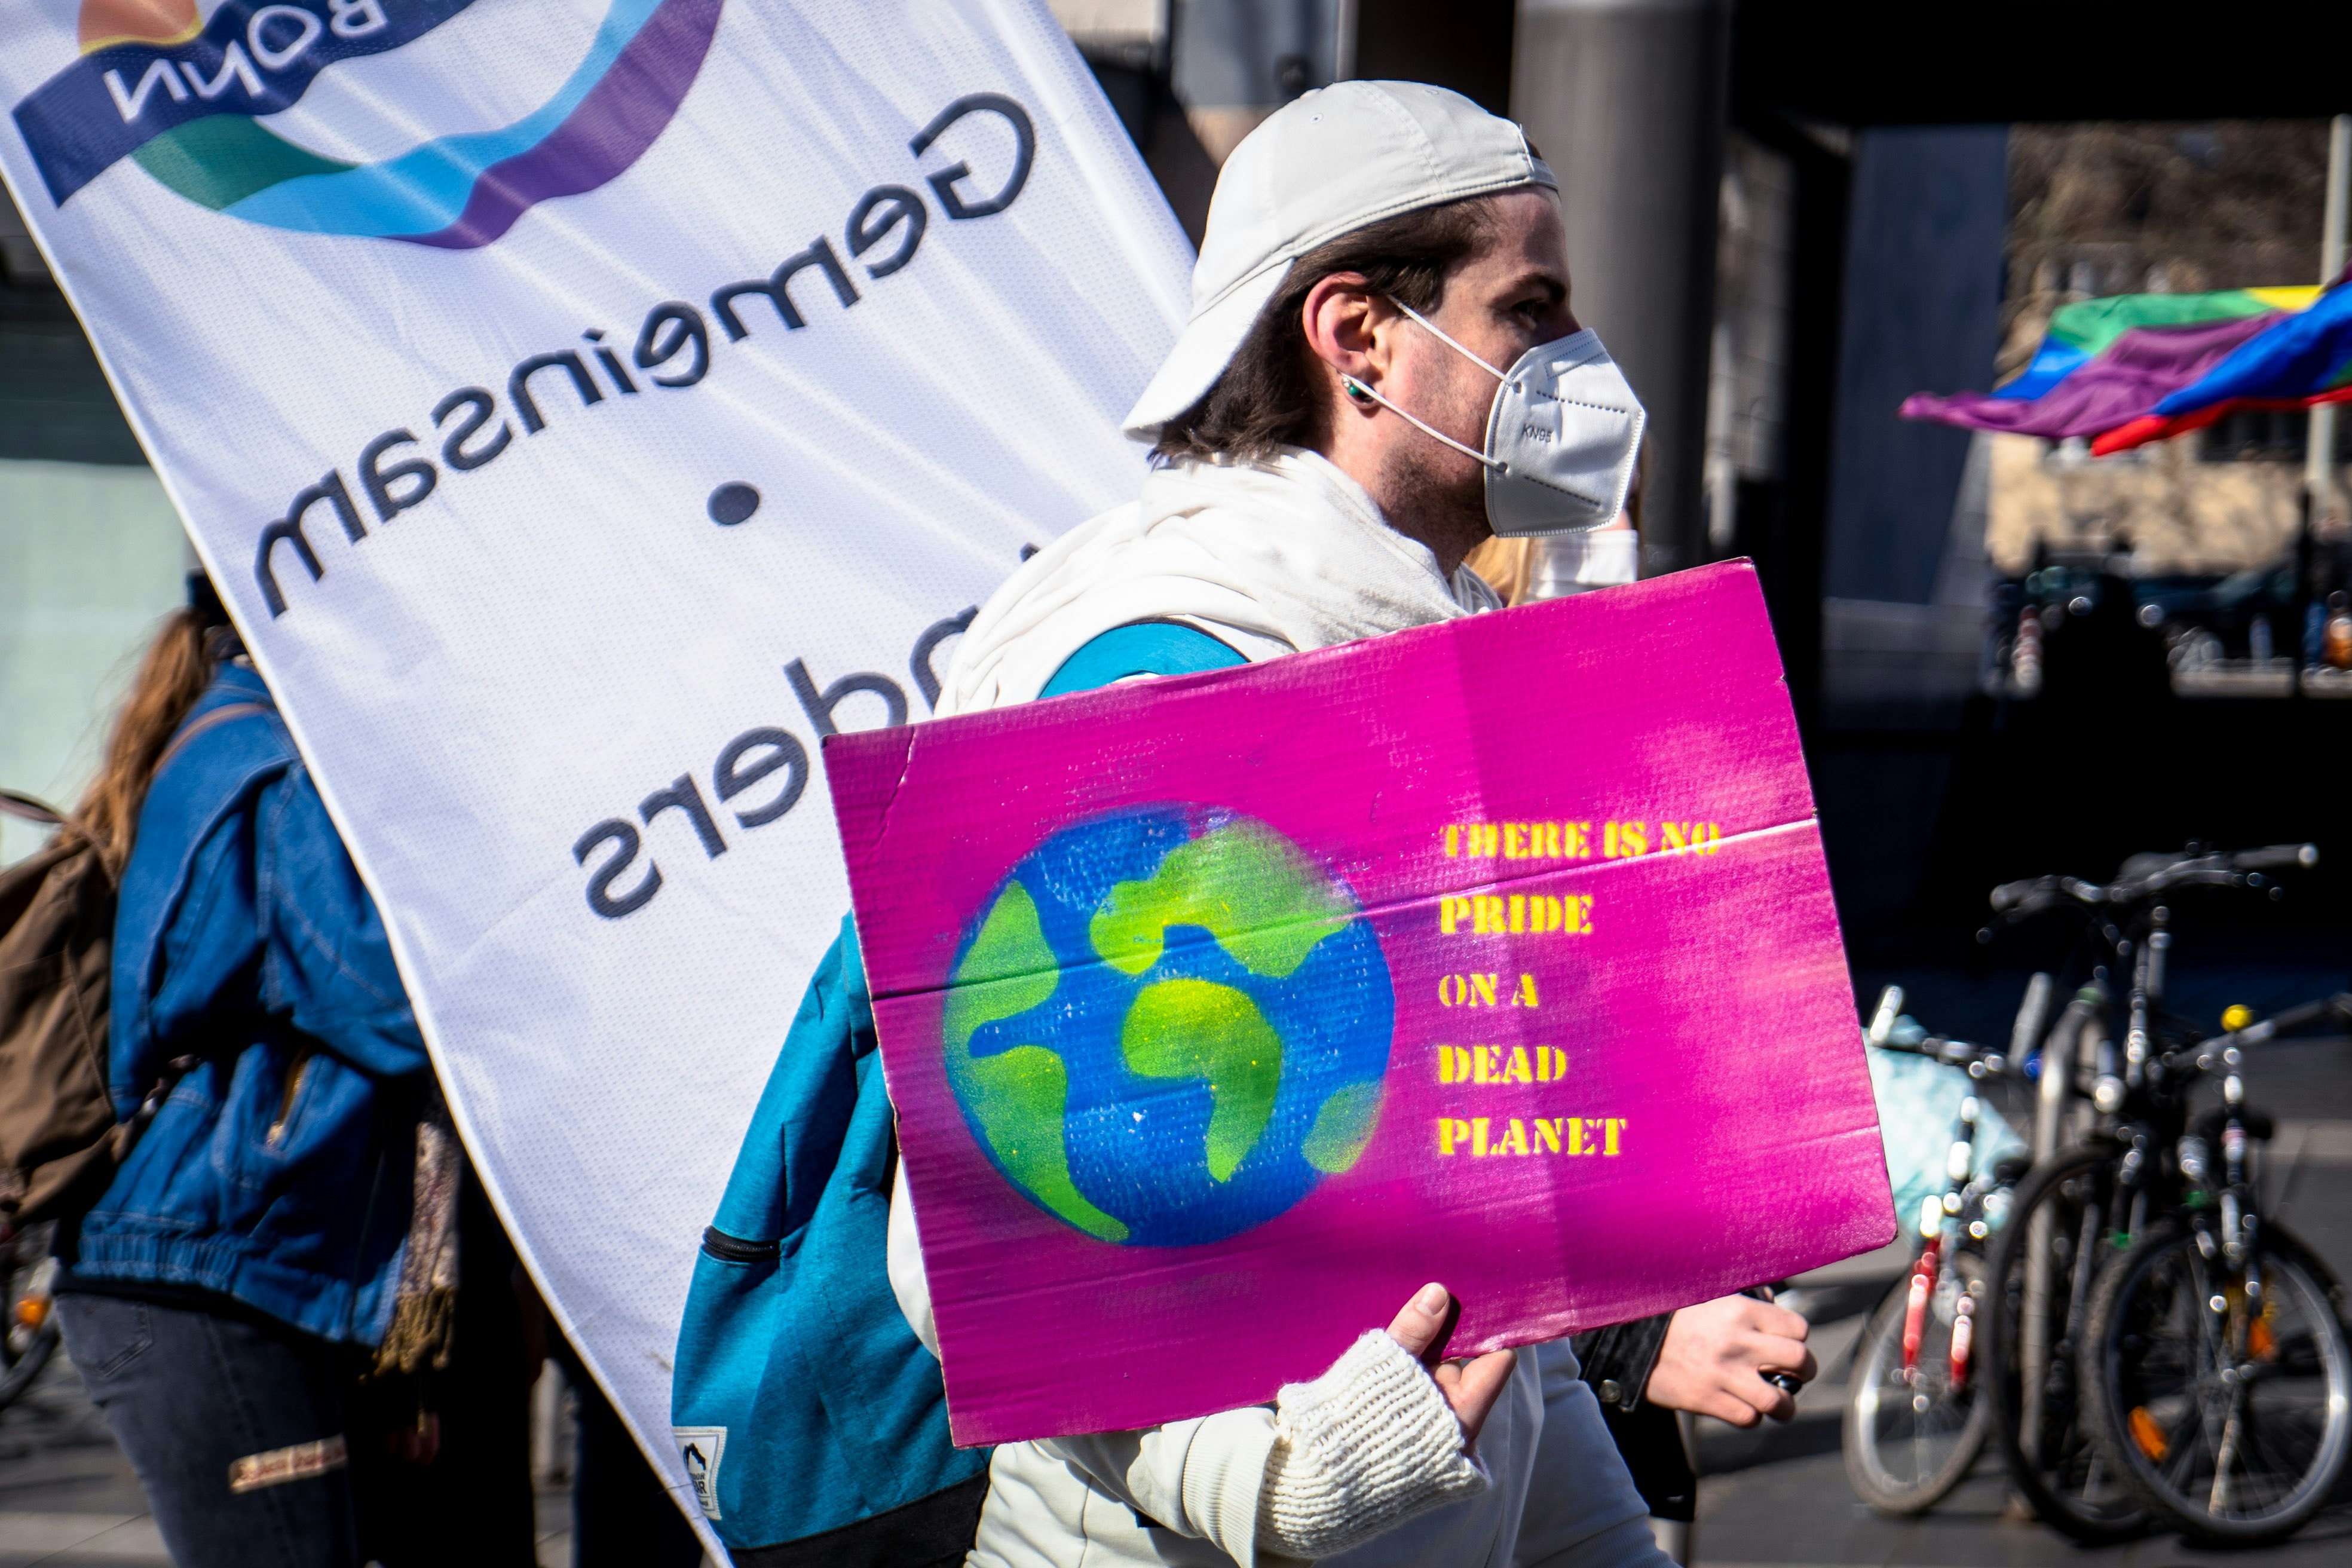 There is no pride on a dead planet! 

- Fridays For Future Bonn, 2021-03-19